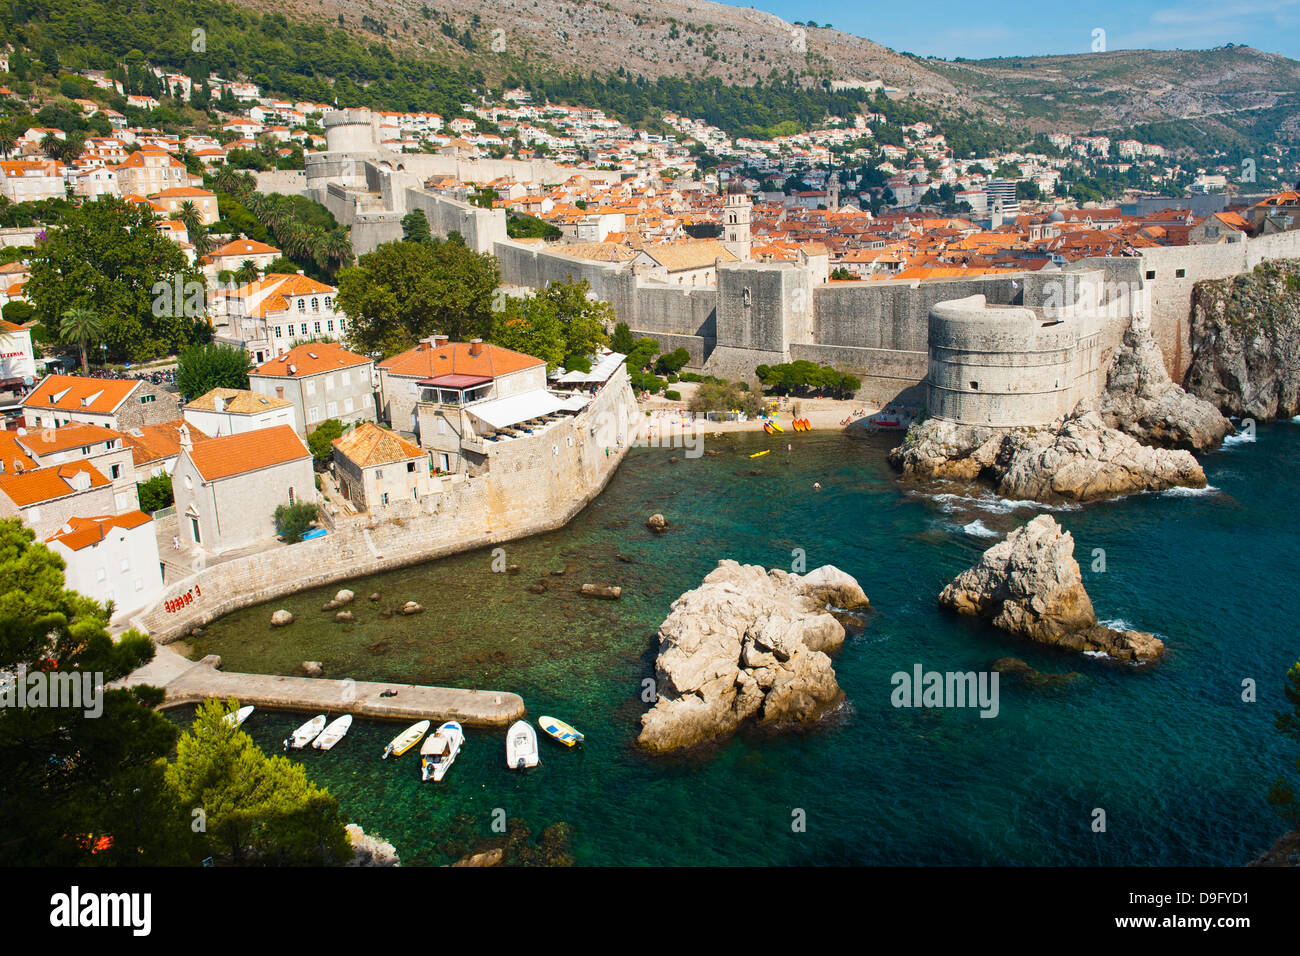 Dubrovnik Old Town and the City Walls, UNESCO World Heritage Site, from Fort Lovrijenac, Dubrovnik, Dalmatian Coast, Croatia Stock Photo